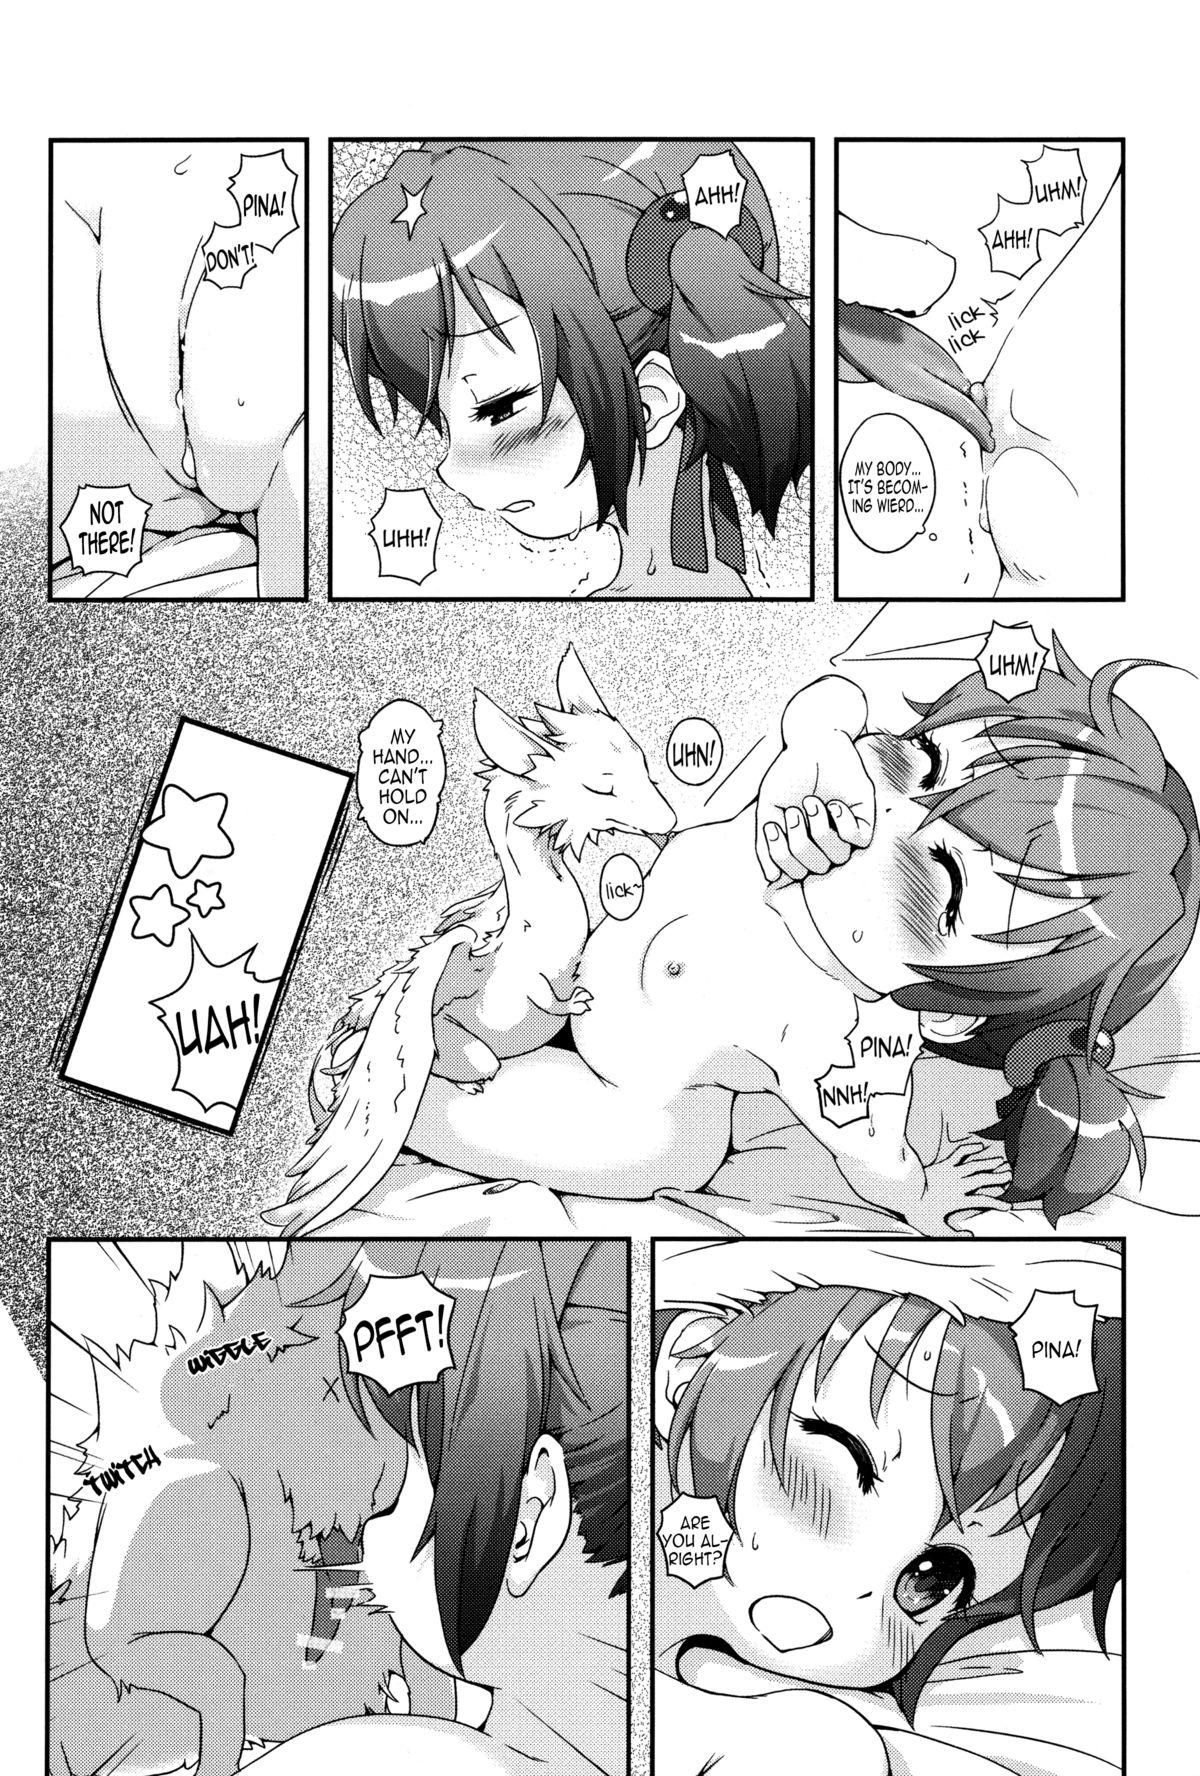 Orgy A Beast Tamer's Special Event - Sword art online Transex - Page 8